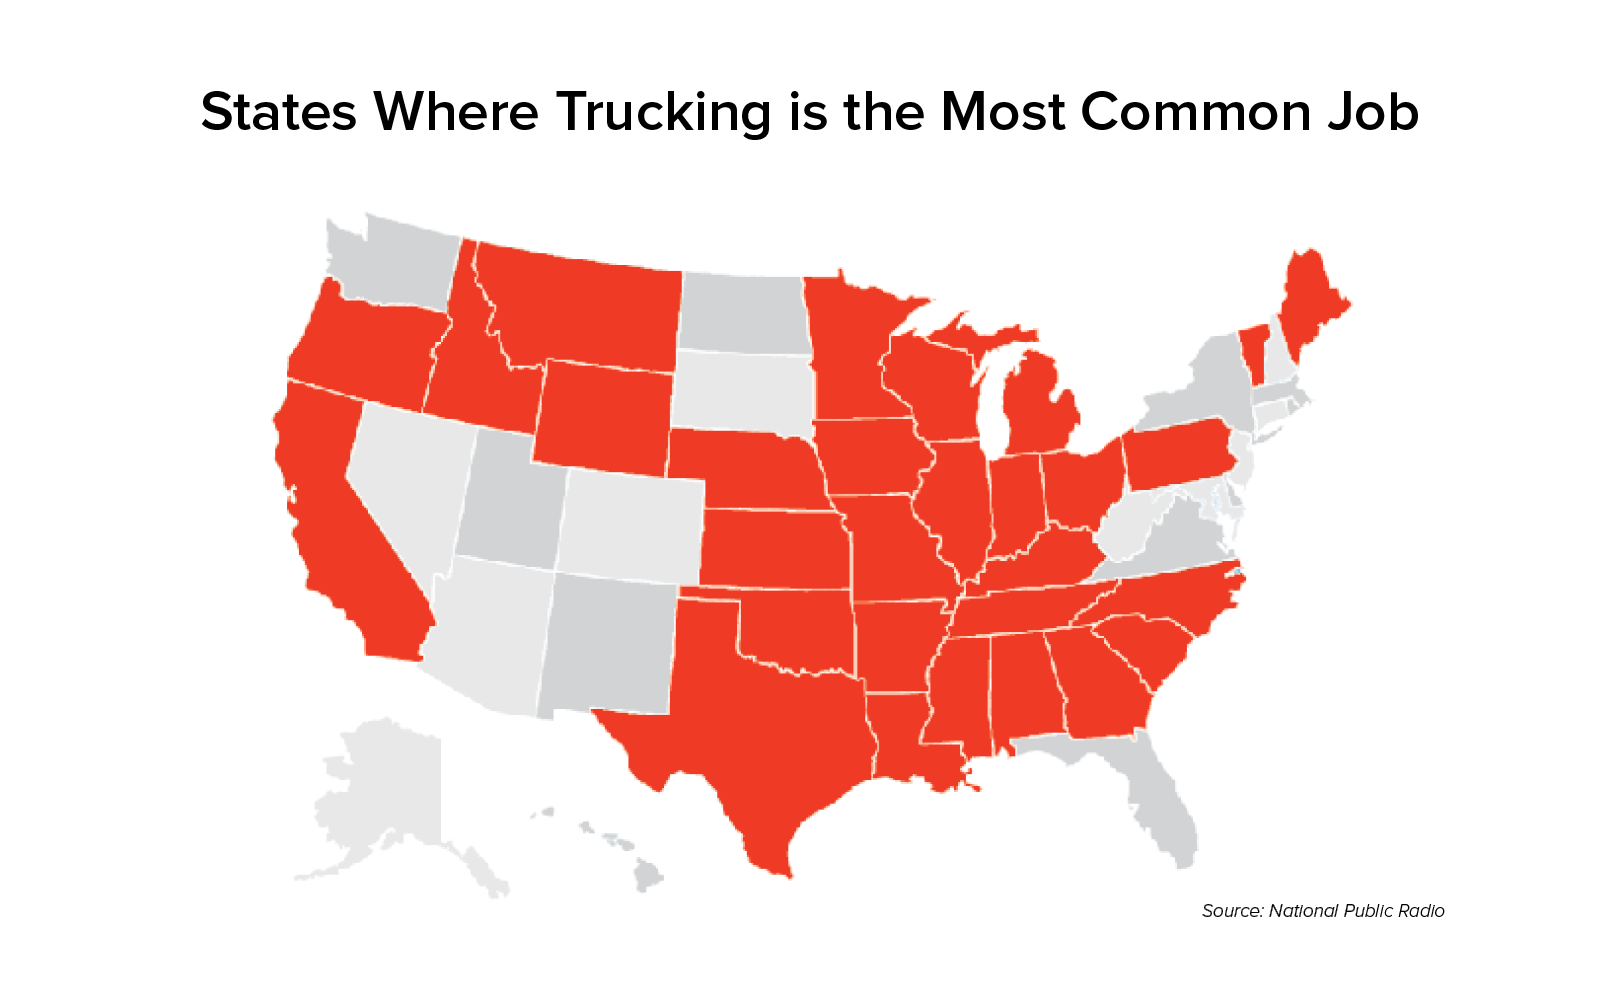 Map of the U.S. showing that truck driving is the most common job in 30 states